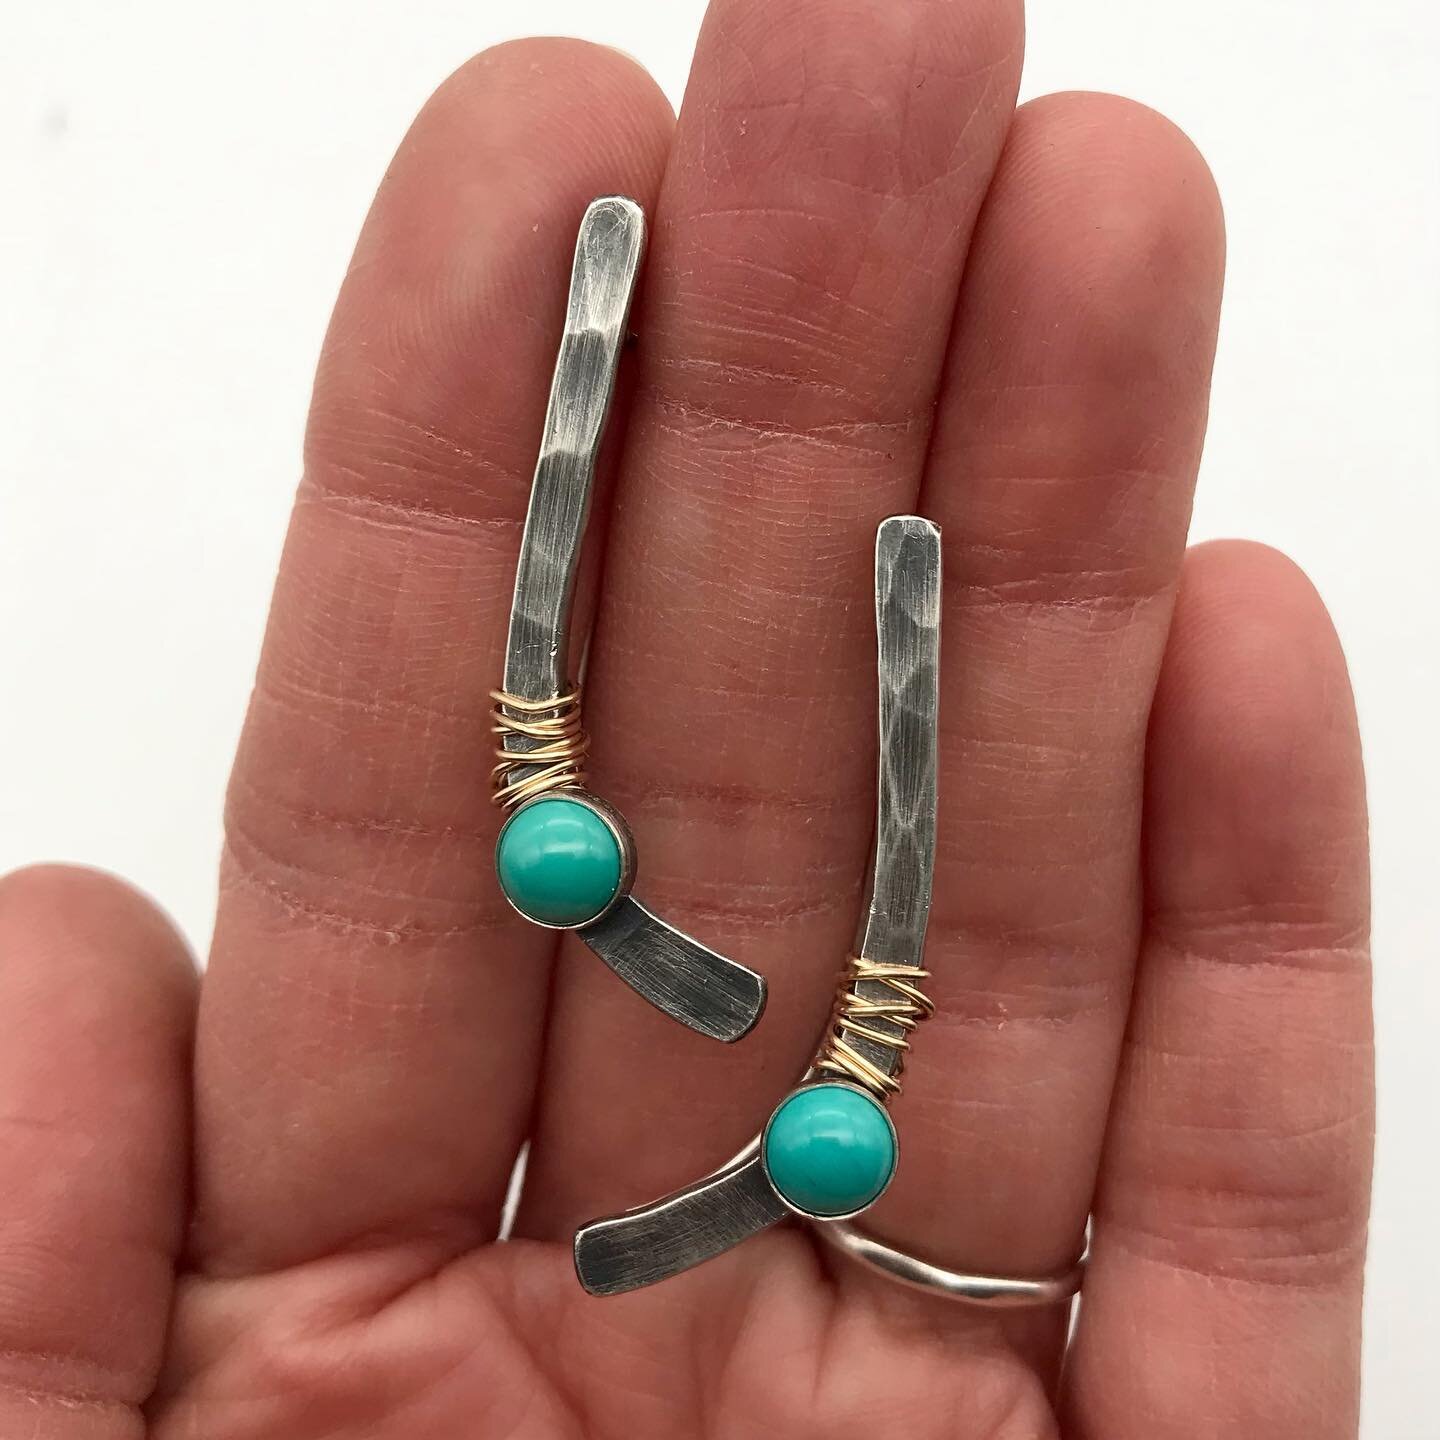 Love these earrings, but they were hard to photograph! #handmade #megtangjewelry #turquoise #mixedmetals www.megtang.com